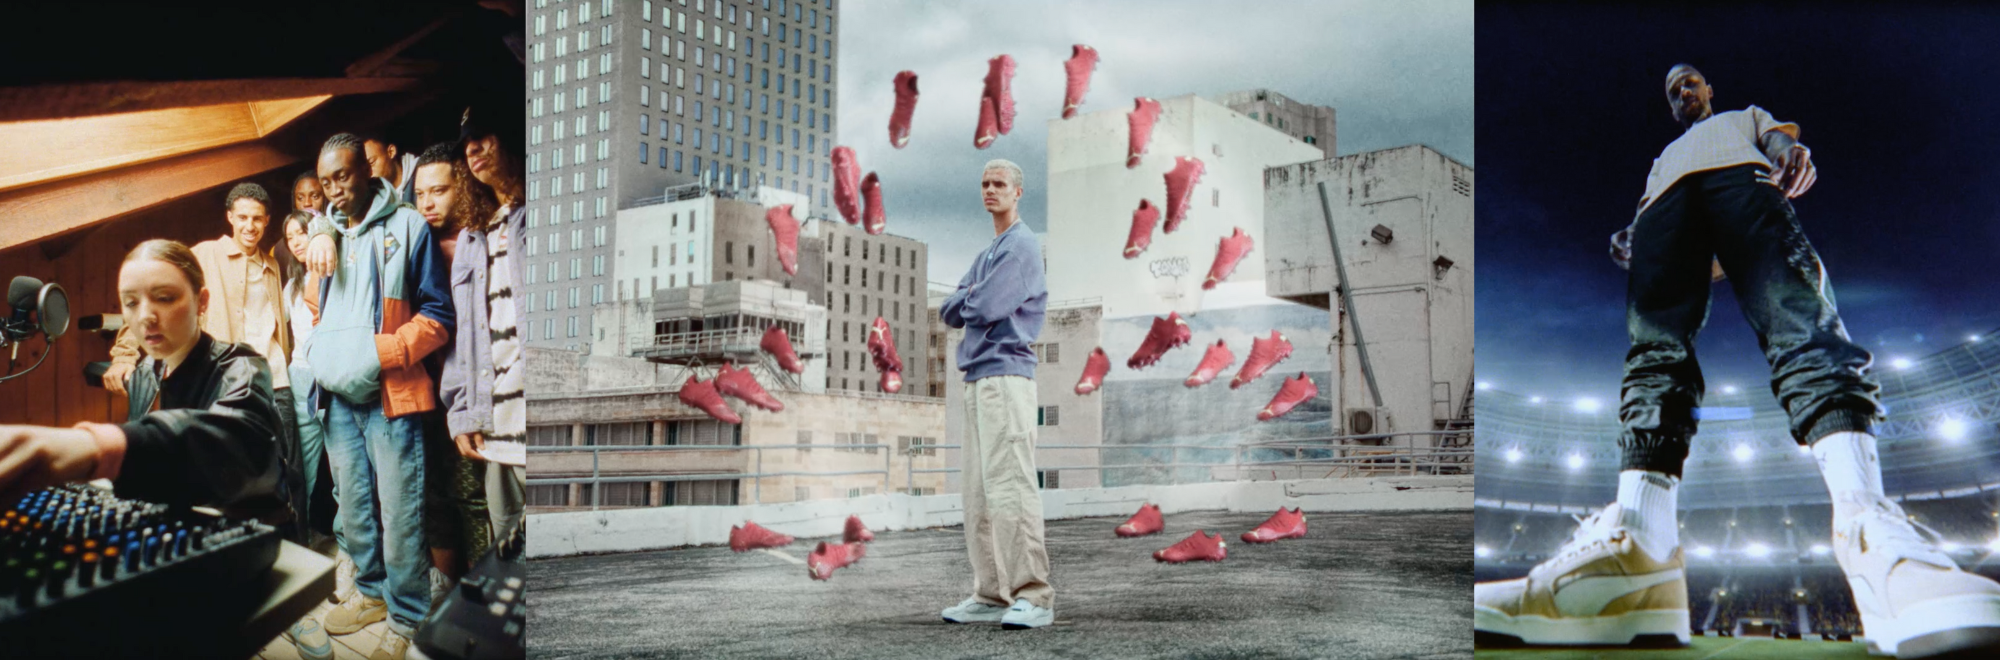 Generation Fearless: The new PUMA world brand film that goes beyond football